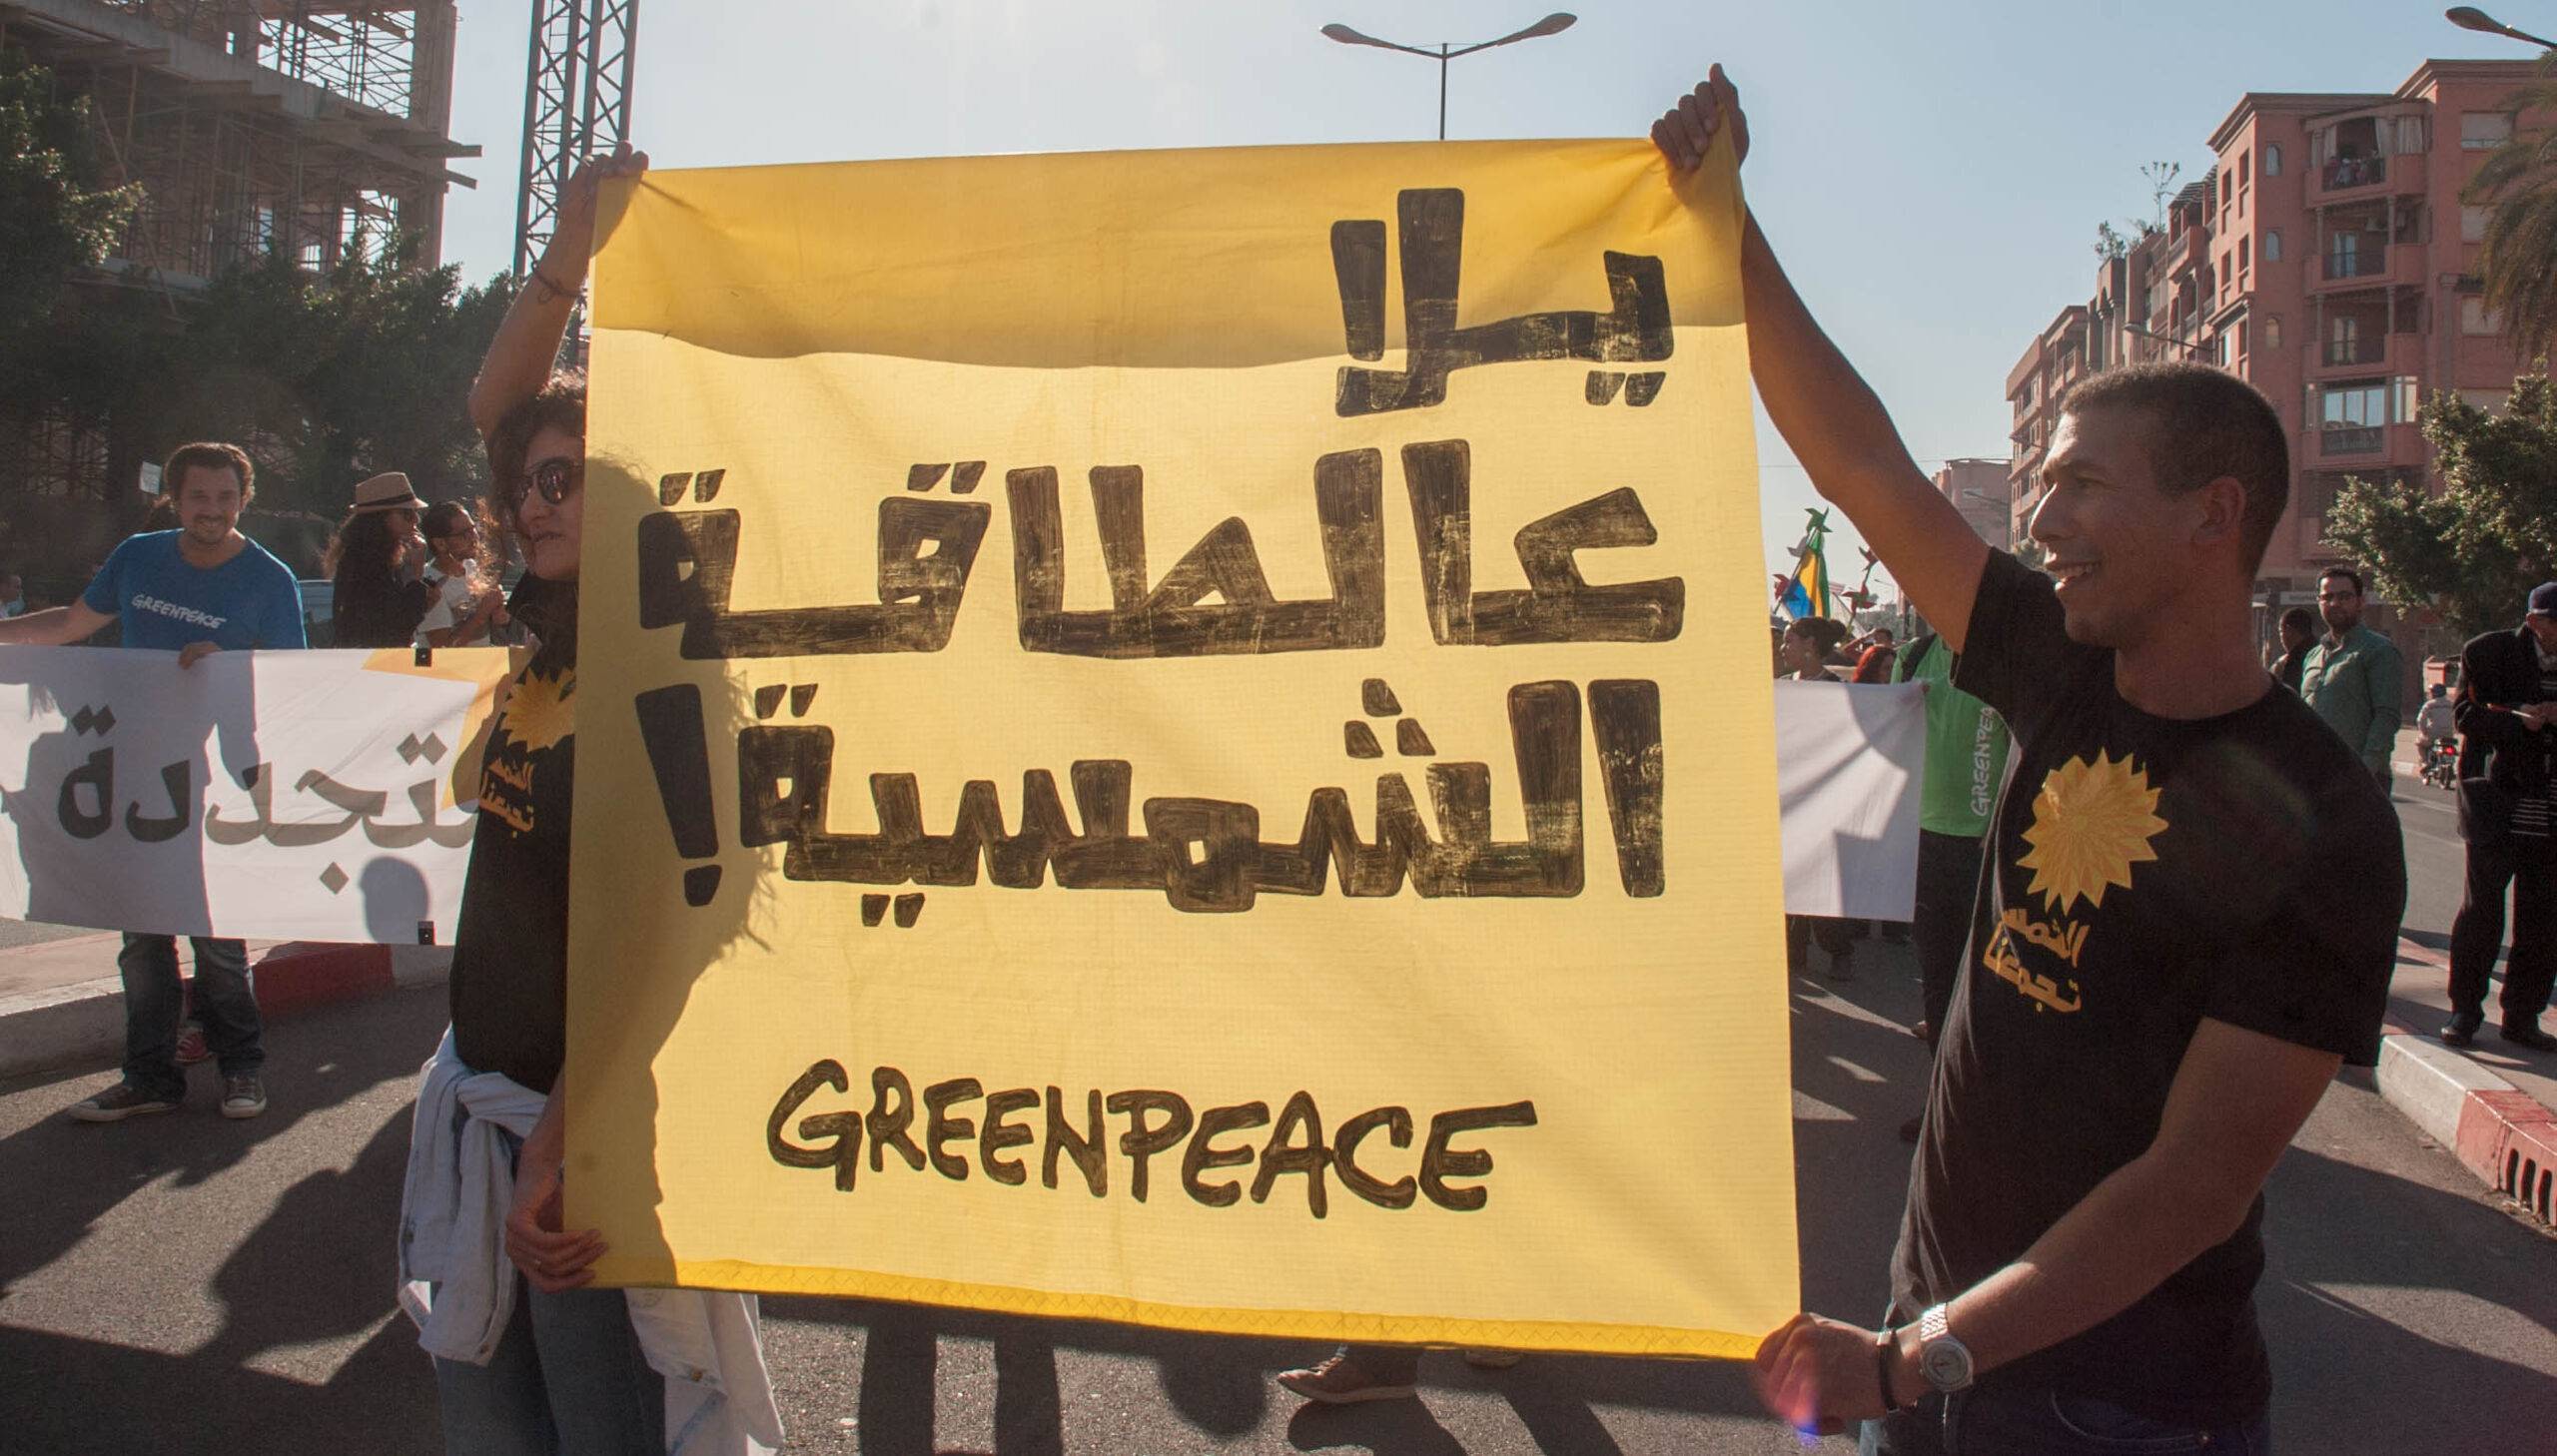 Activists hold banners during a demonstration against climate change and calling for environmental action in Morocco on November 13, 2016 [Jalal Morchidi/Anadolu Agency